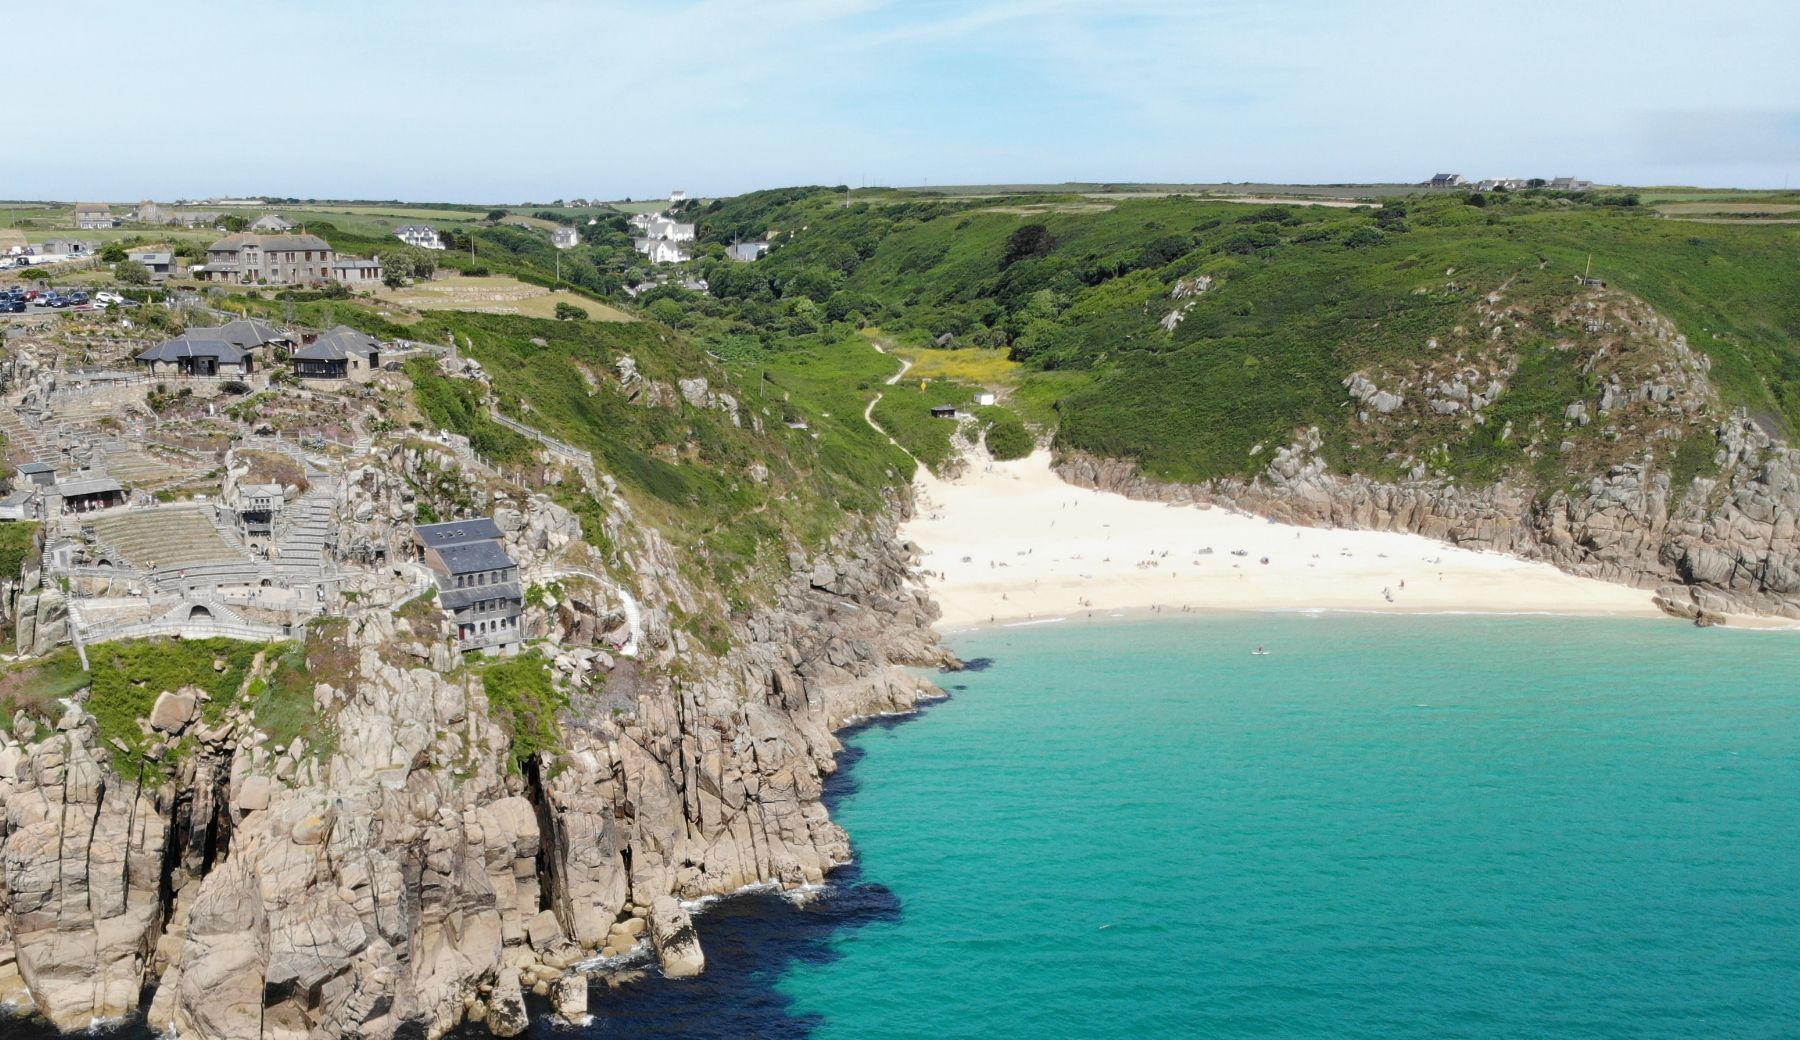 Image of Porthcurno beach in Cornwall